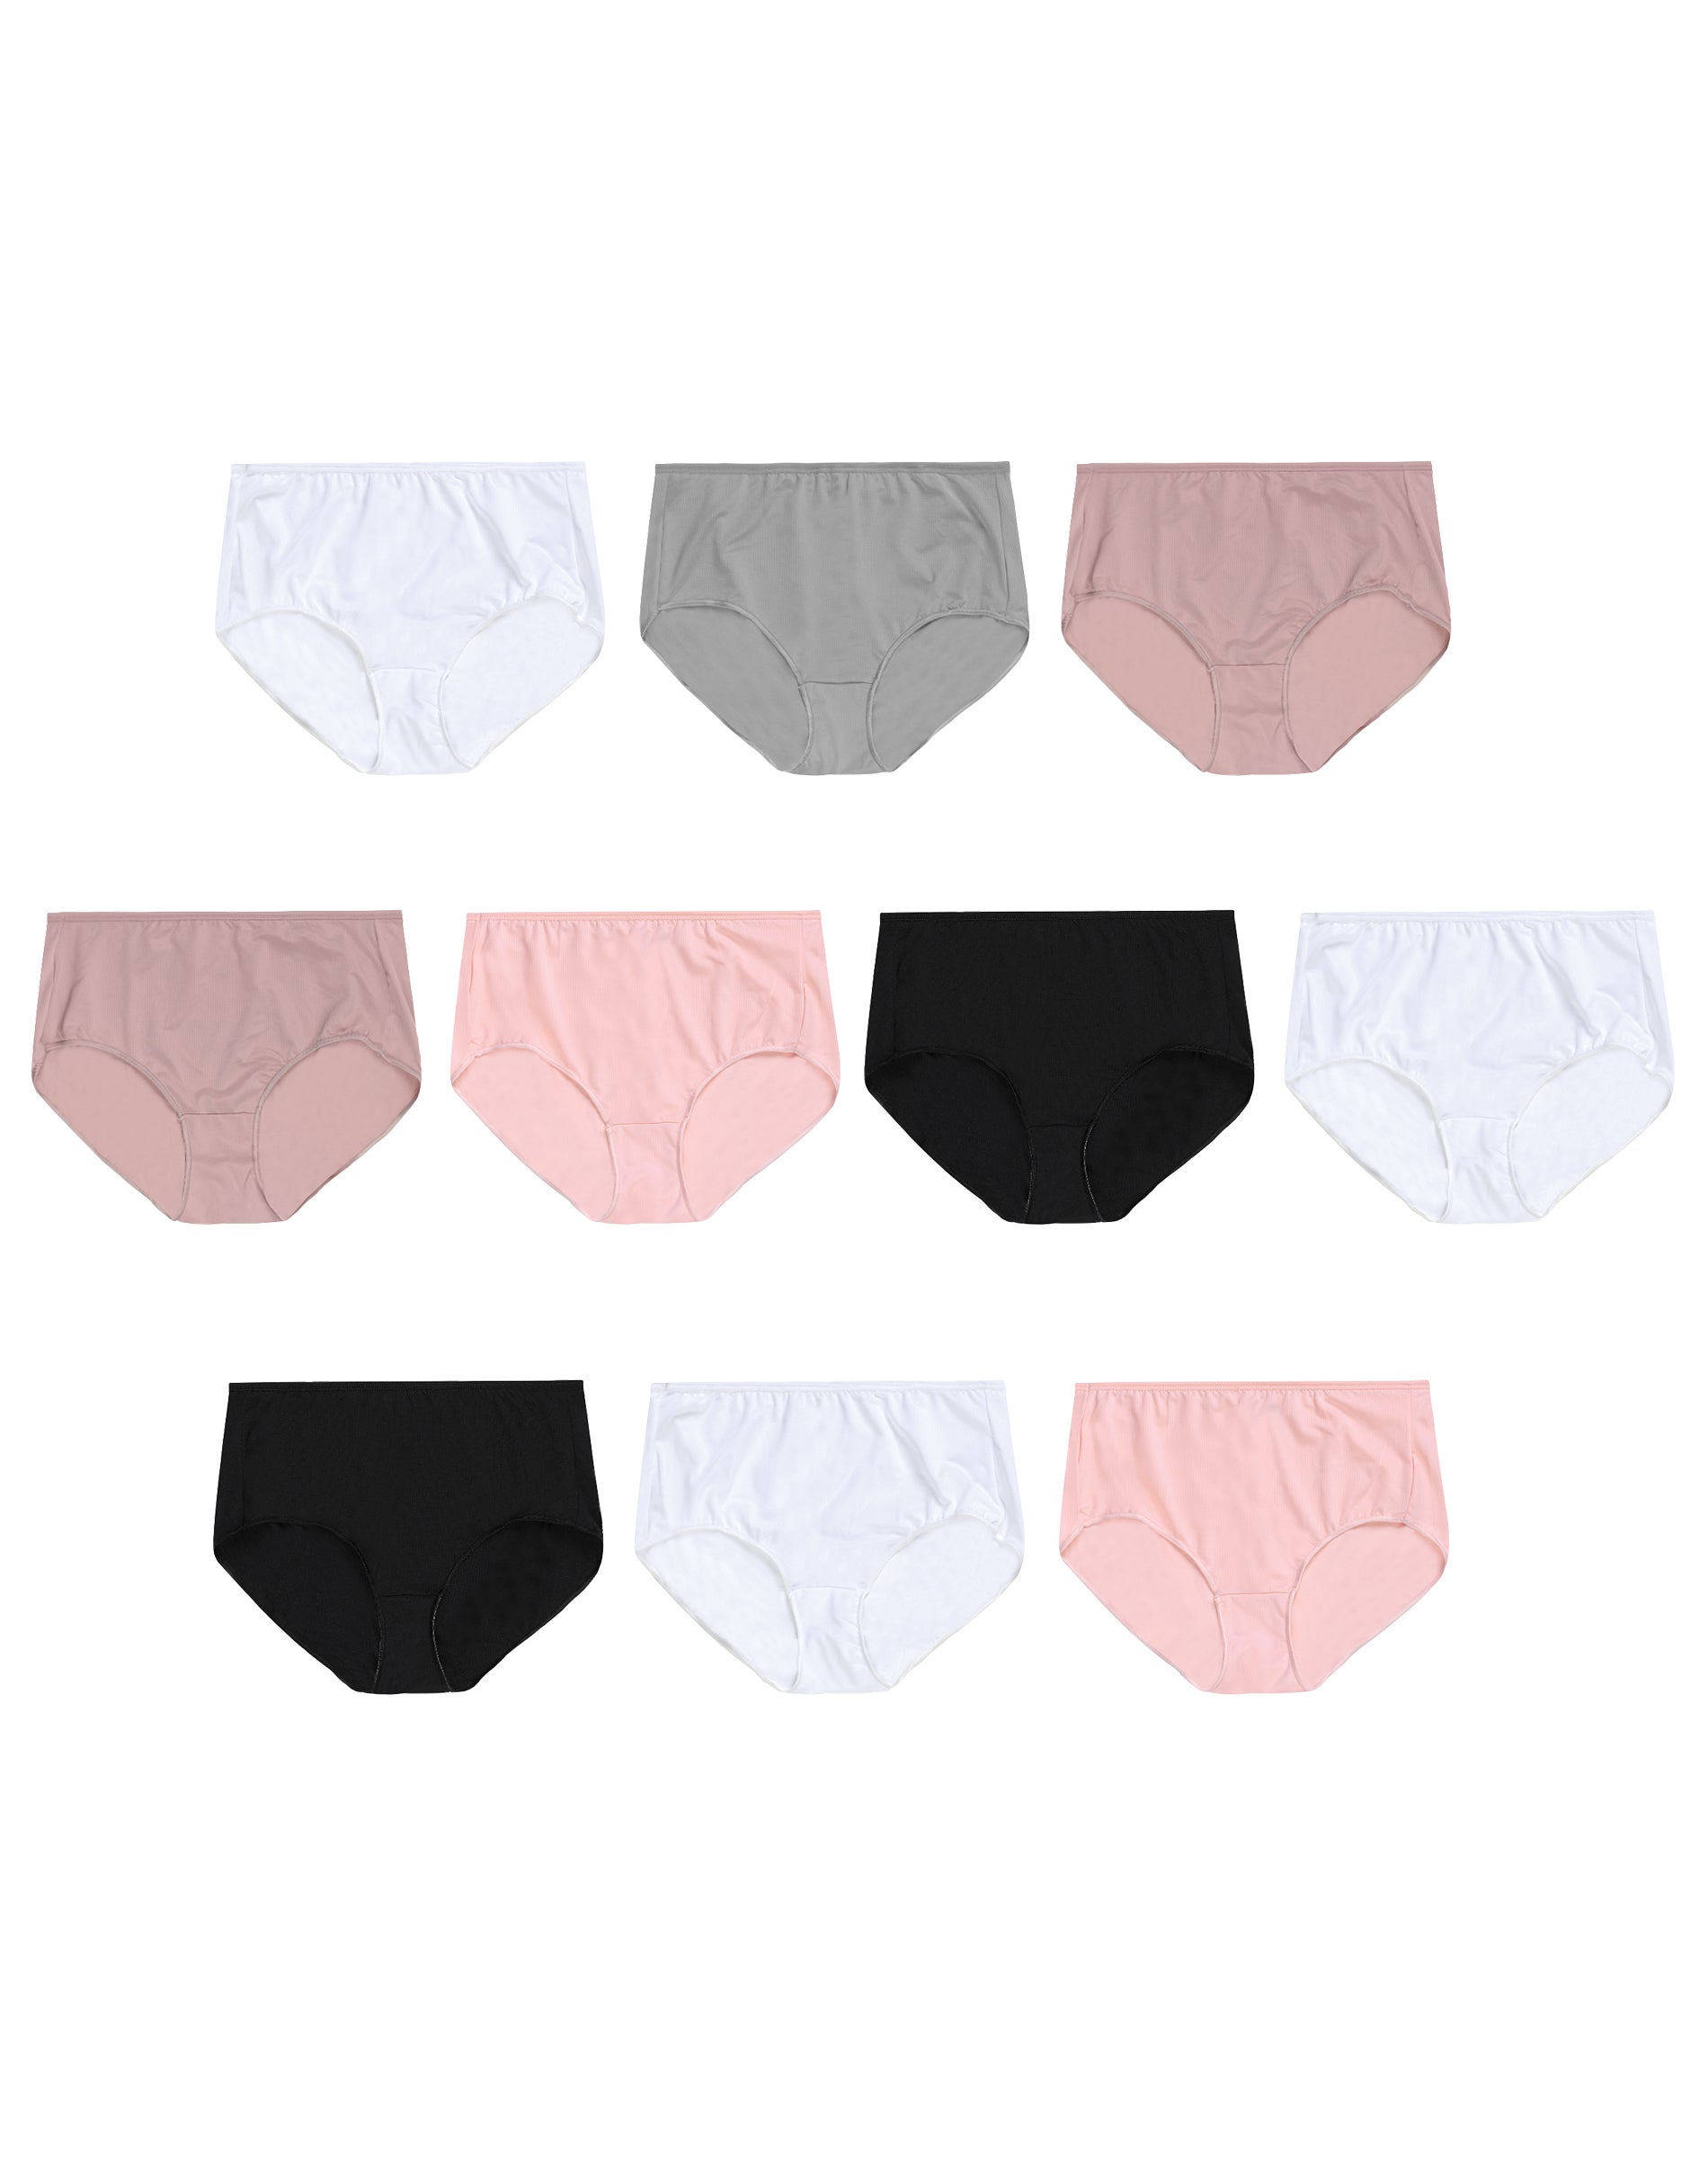 Hanes Breathable Mesh Women's Brief Underwear, 10-Pack Assorted 8 - image 1 of 10